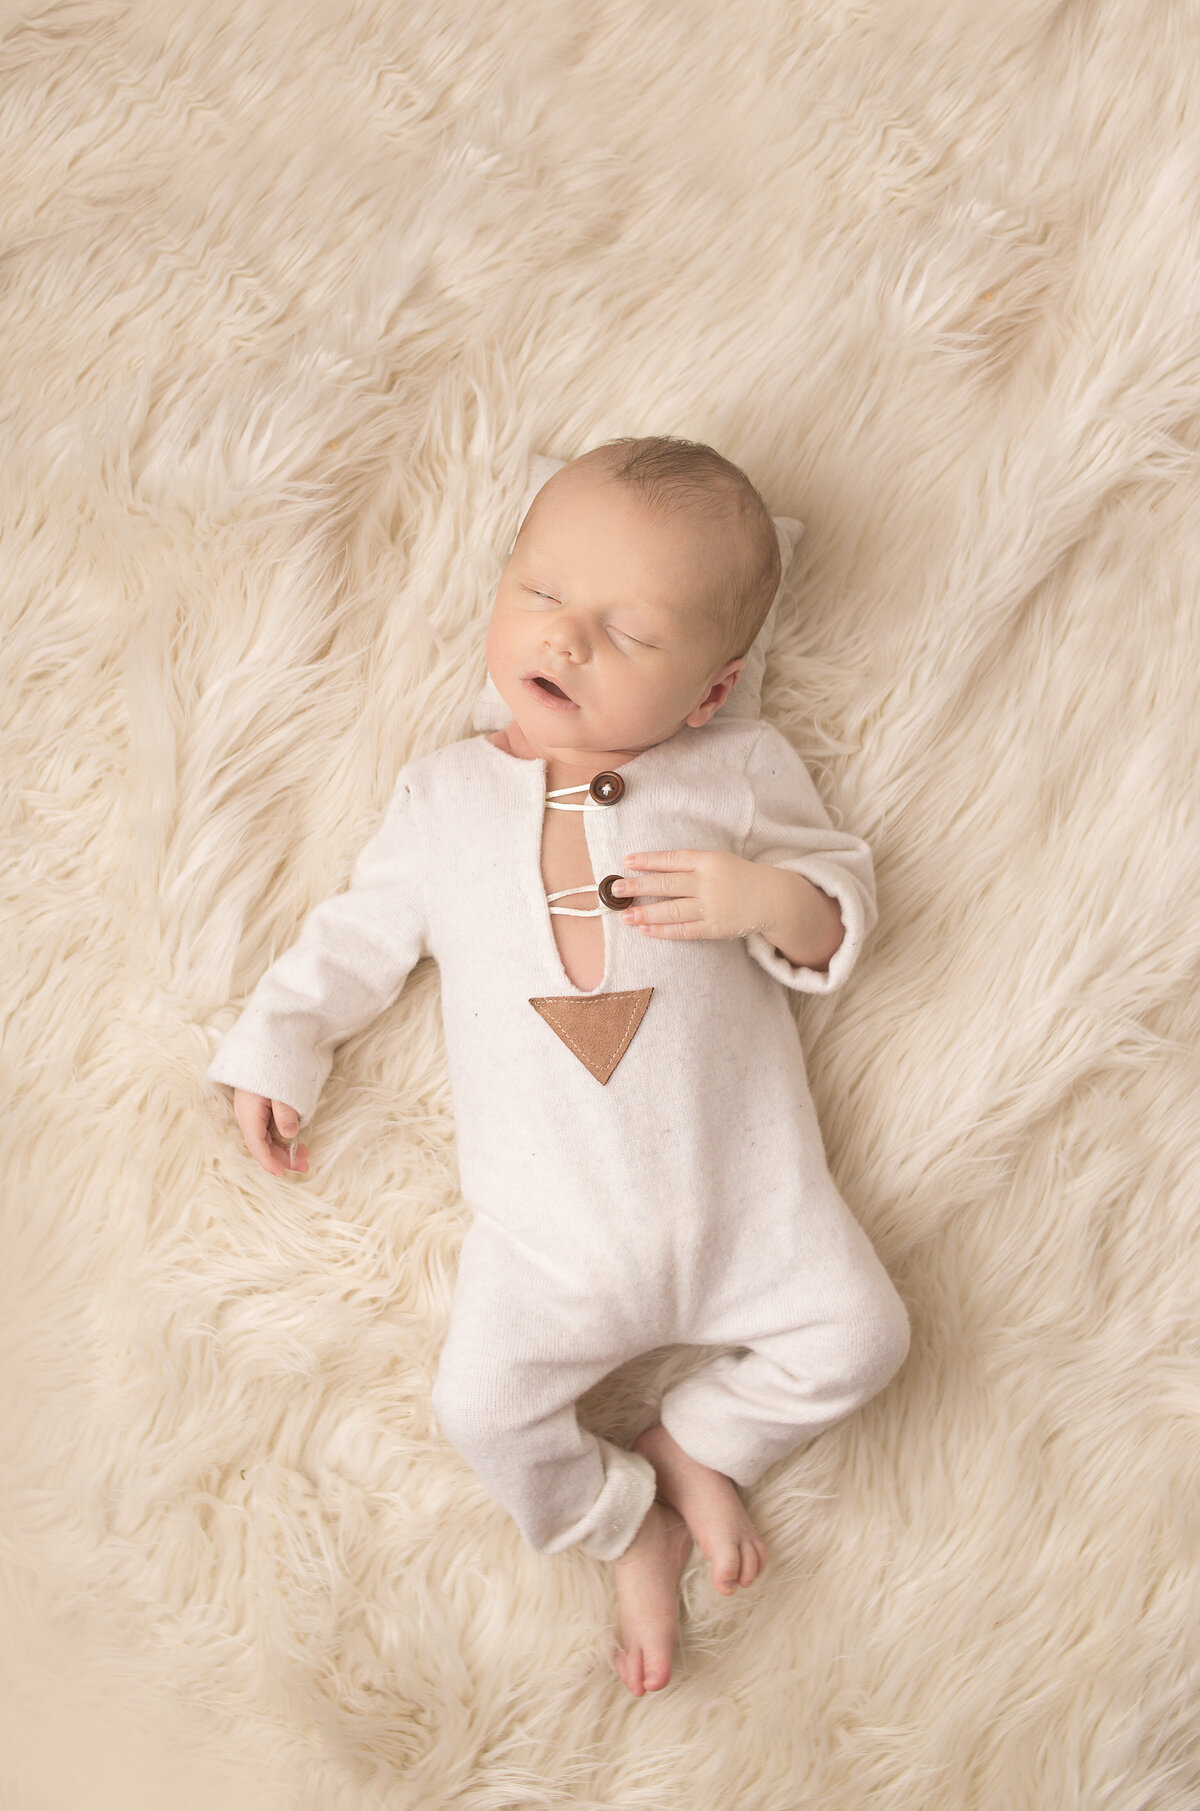 Newborn baby wearing tan outfit during newborn photoshoot in Franklin Tennessee photography studio